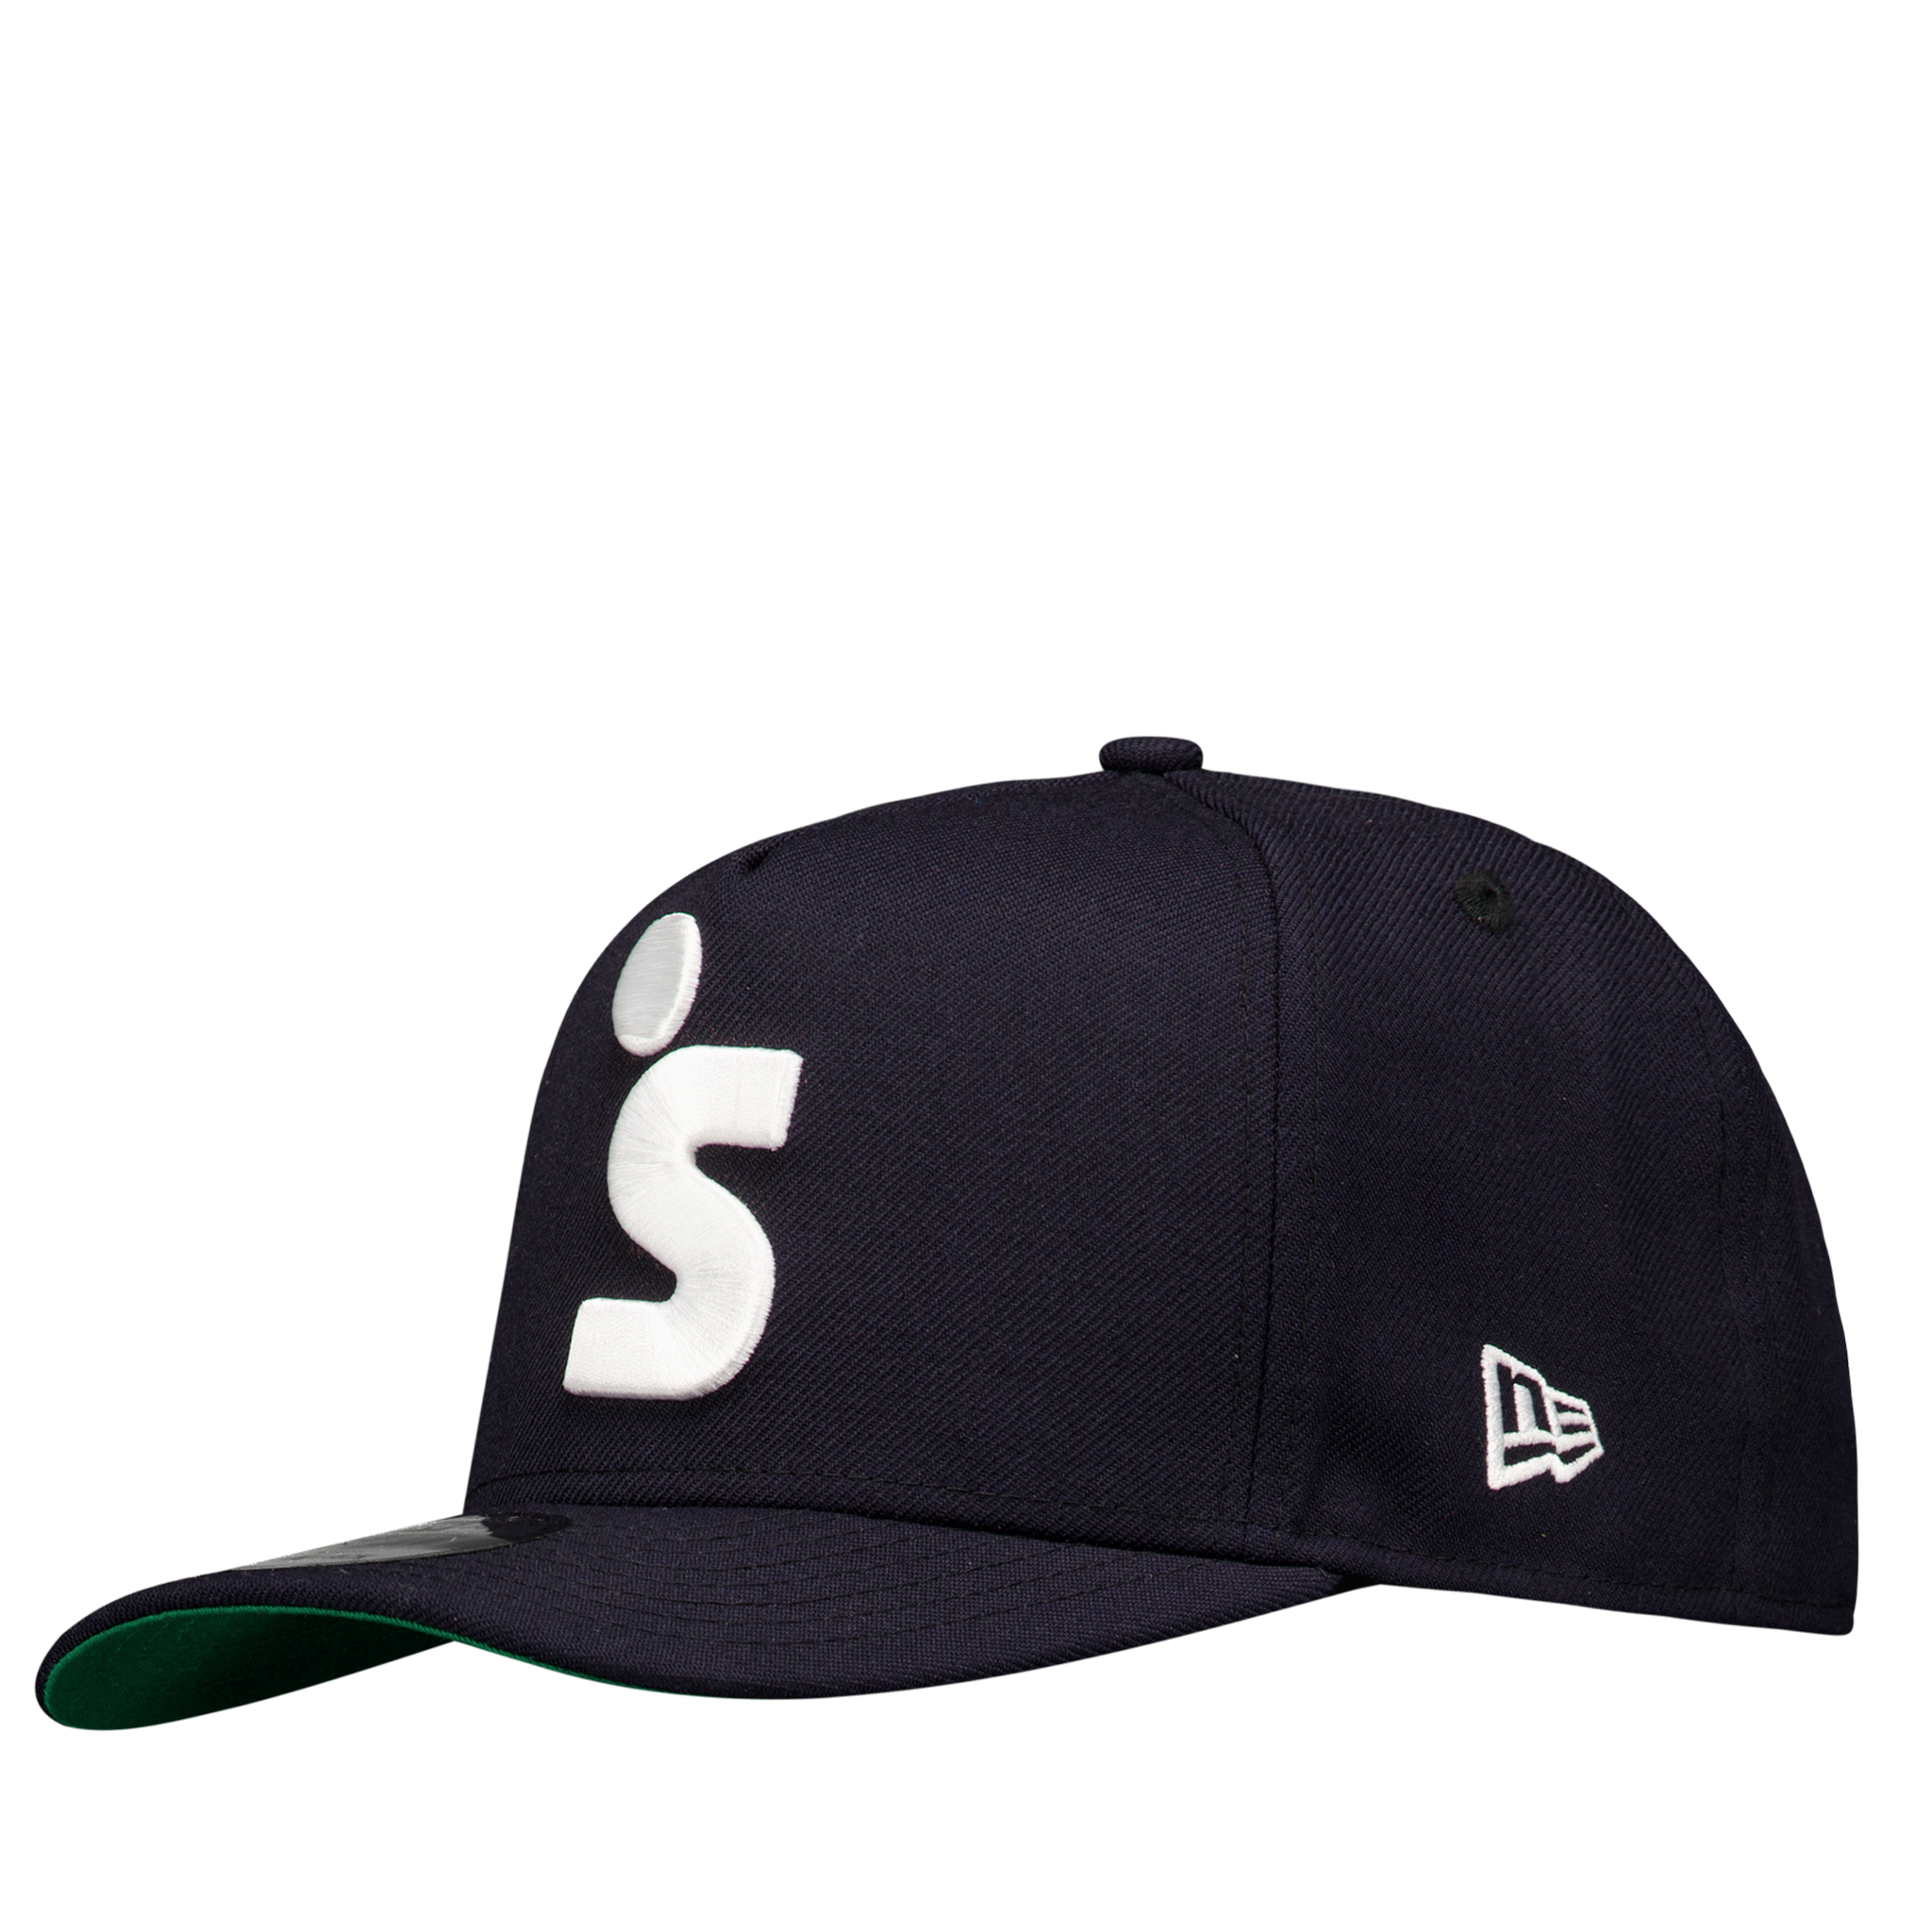 Wish ATL S-Man 9 Fifty A-Frame Twill Snap Back